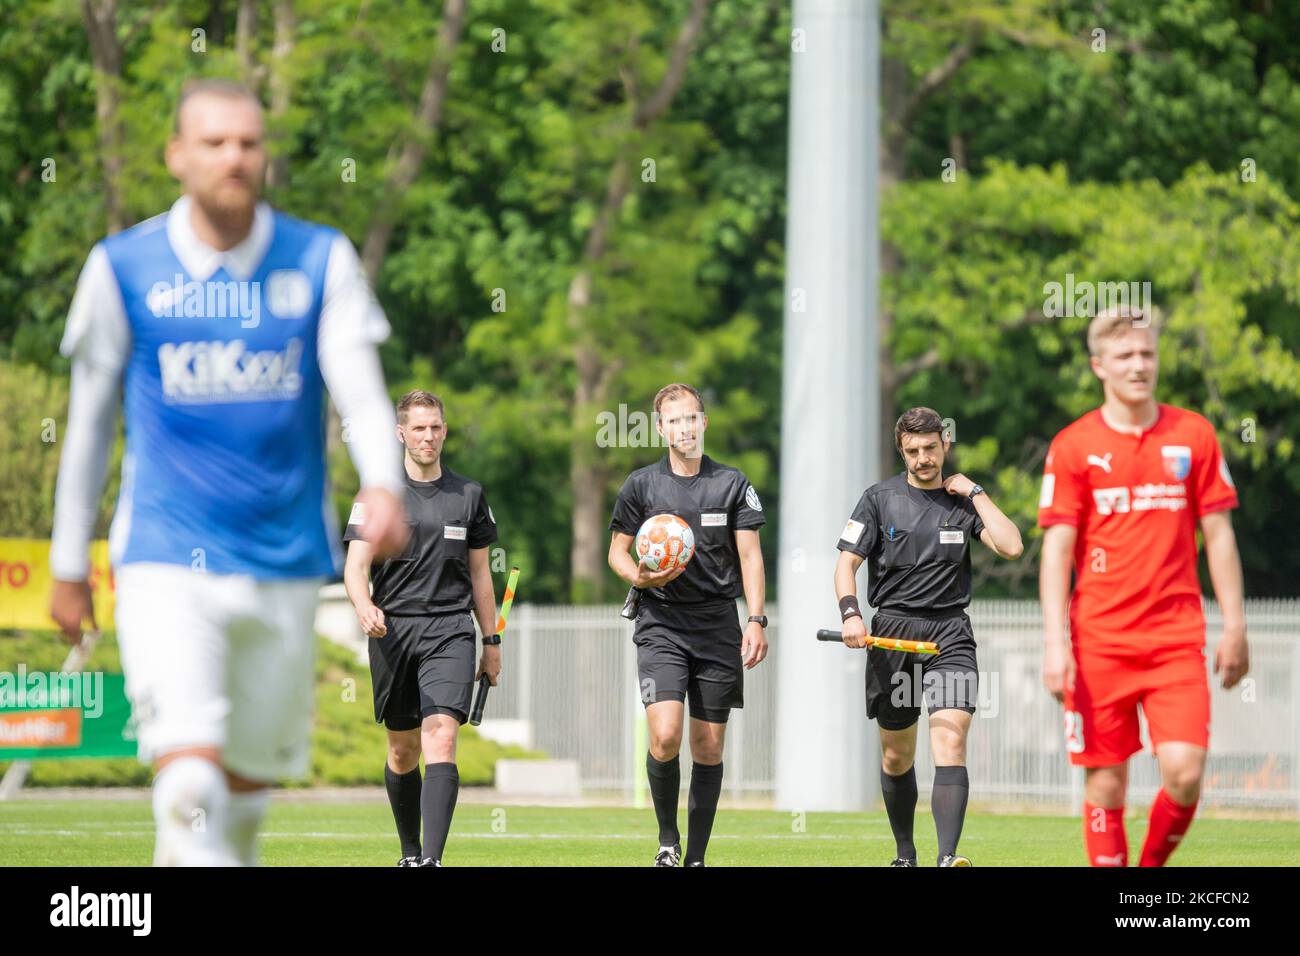 The referee trio Florian Heft, Timo Daniel and Marius Schluewe on the way to the half-time break during the lower saxony cup final between SV Drochtersen/Assel and SV Meppen at Eilenriedestadium on May 29, 2021 in Hanover, Germany. (Photo by Peter Niedung/NurPhoto) Stock Photo